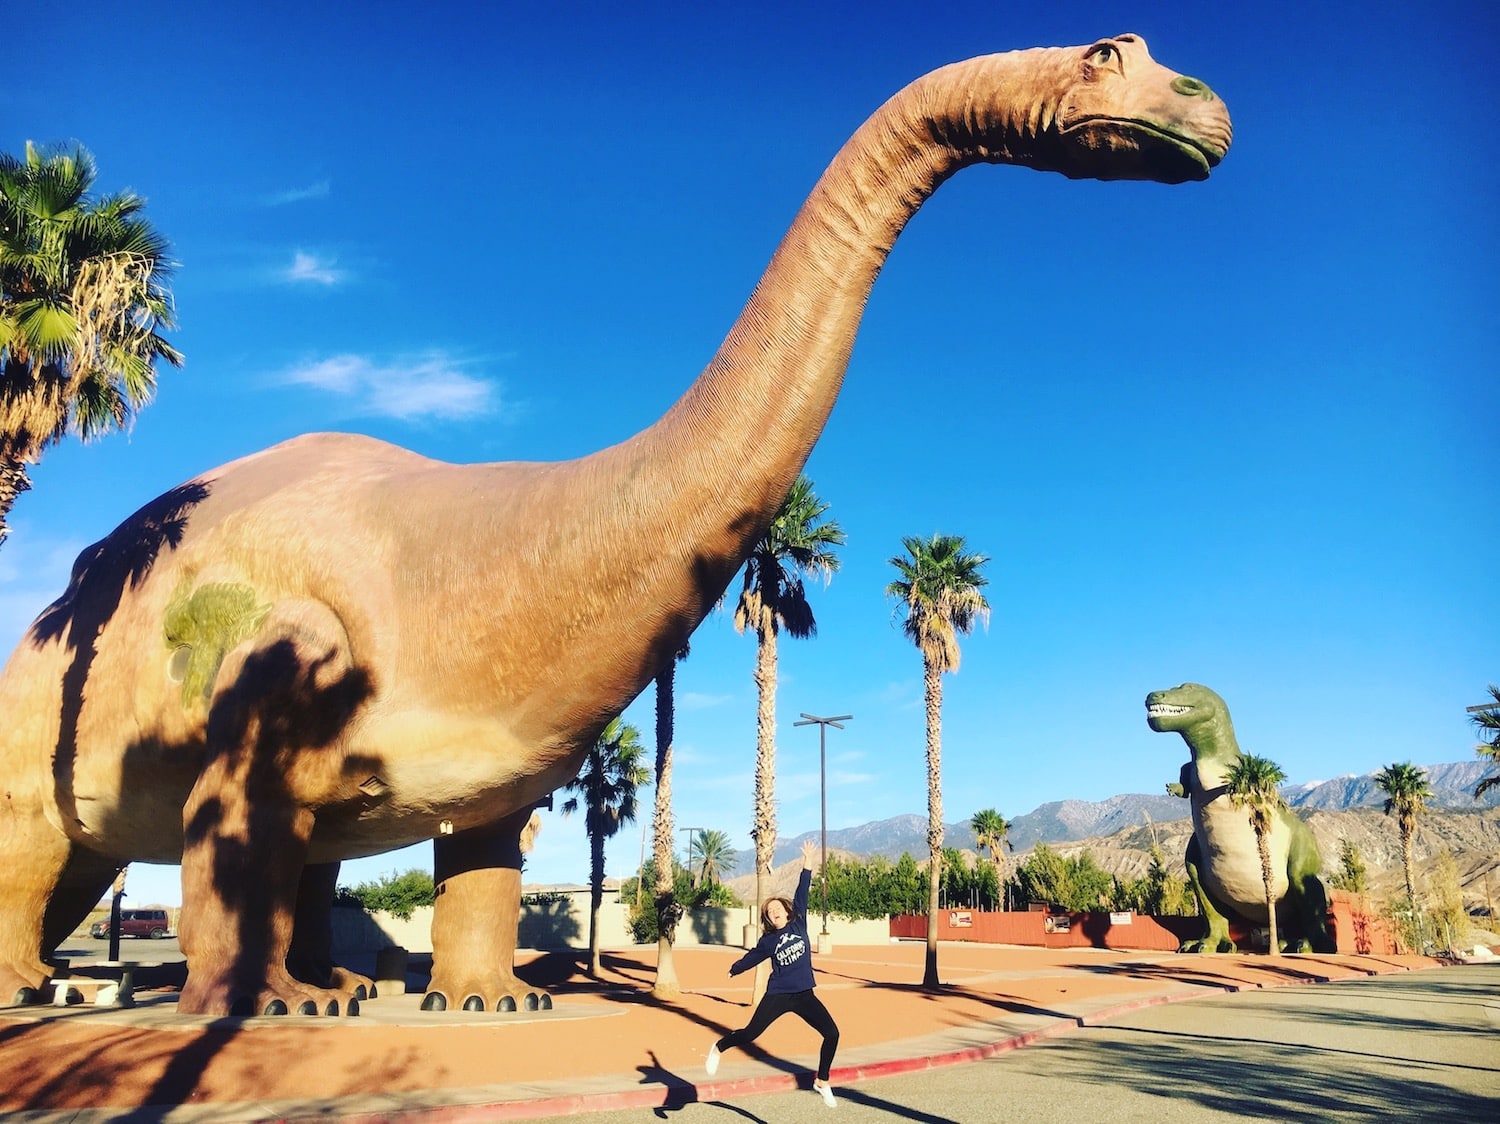 The giant Cabazon Dinosaurs in Palm Springs California.